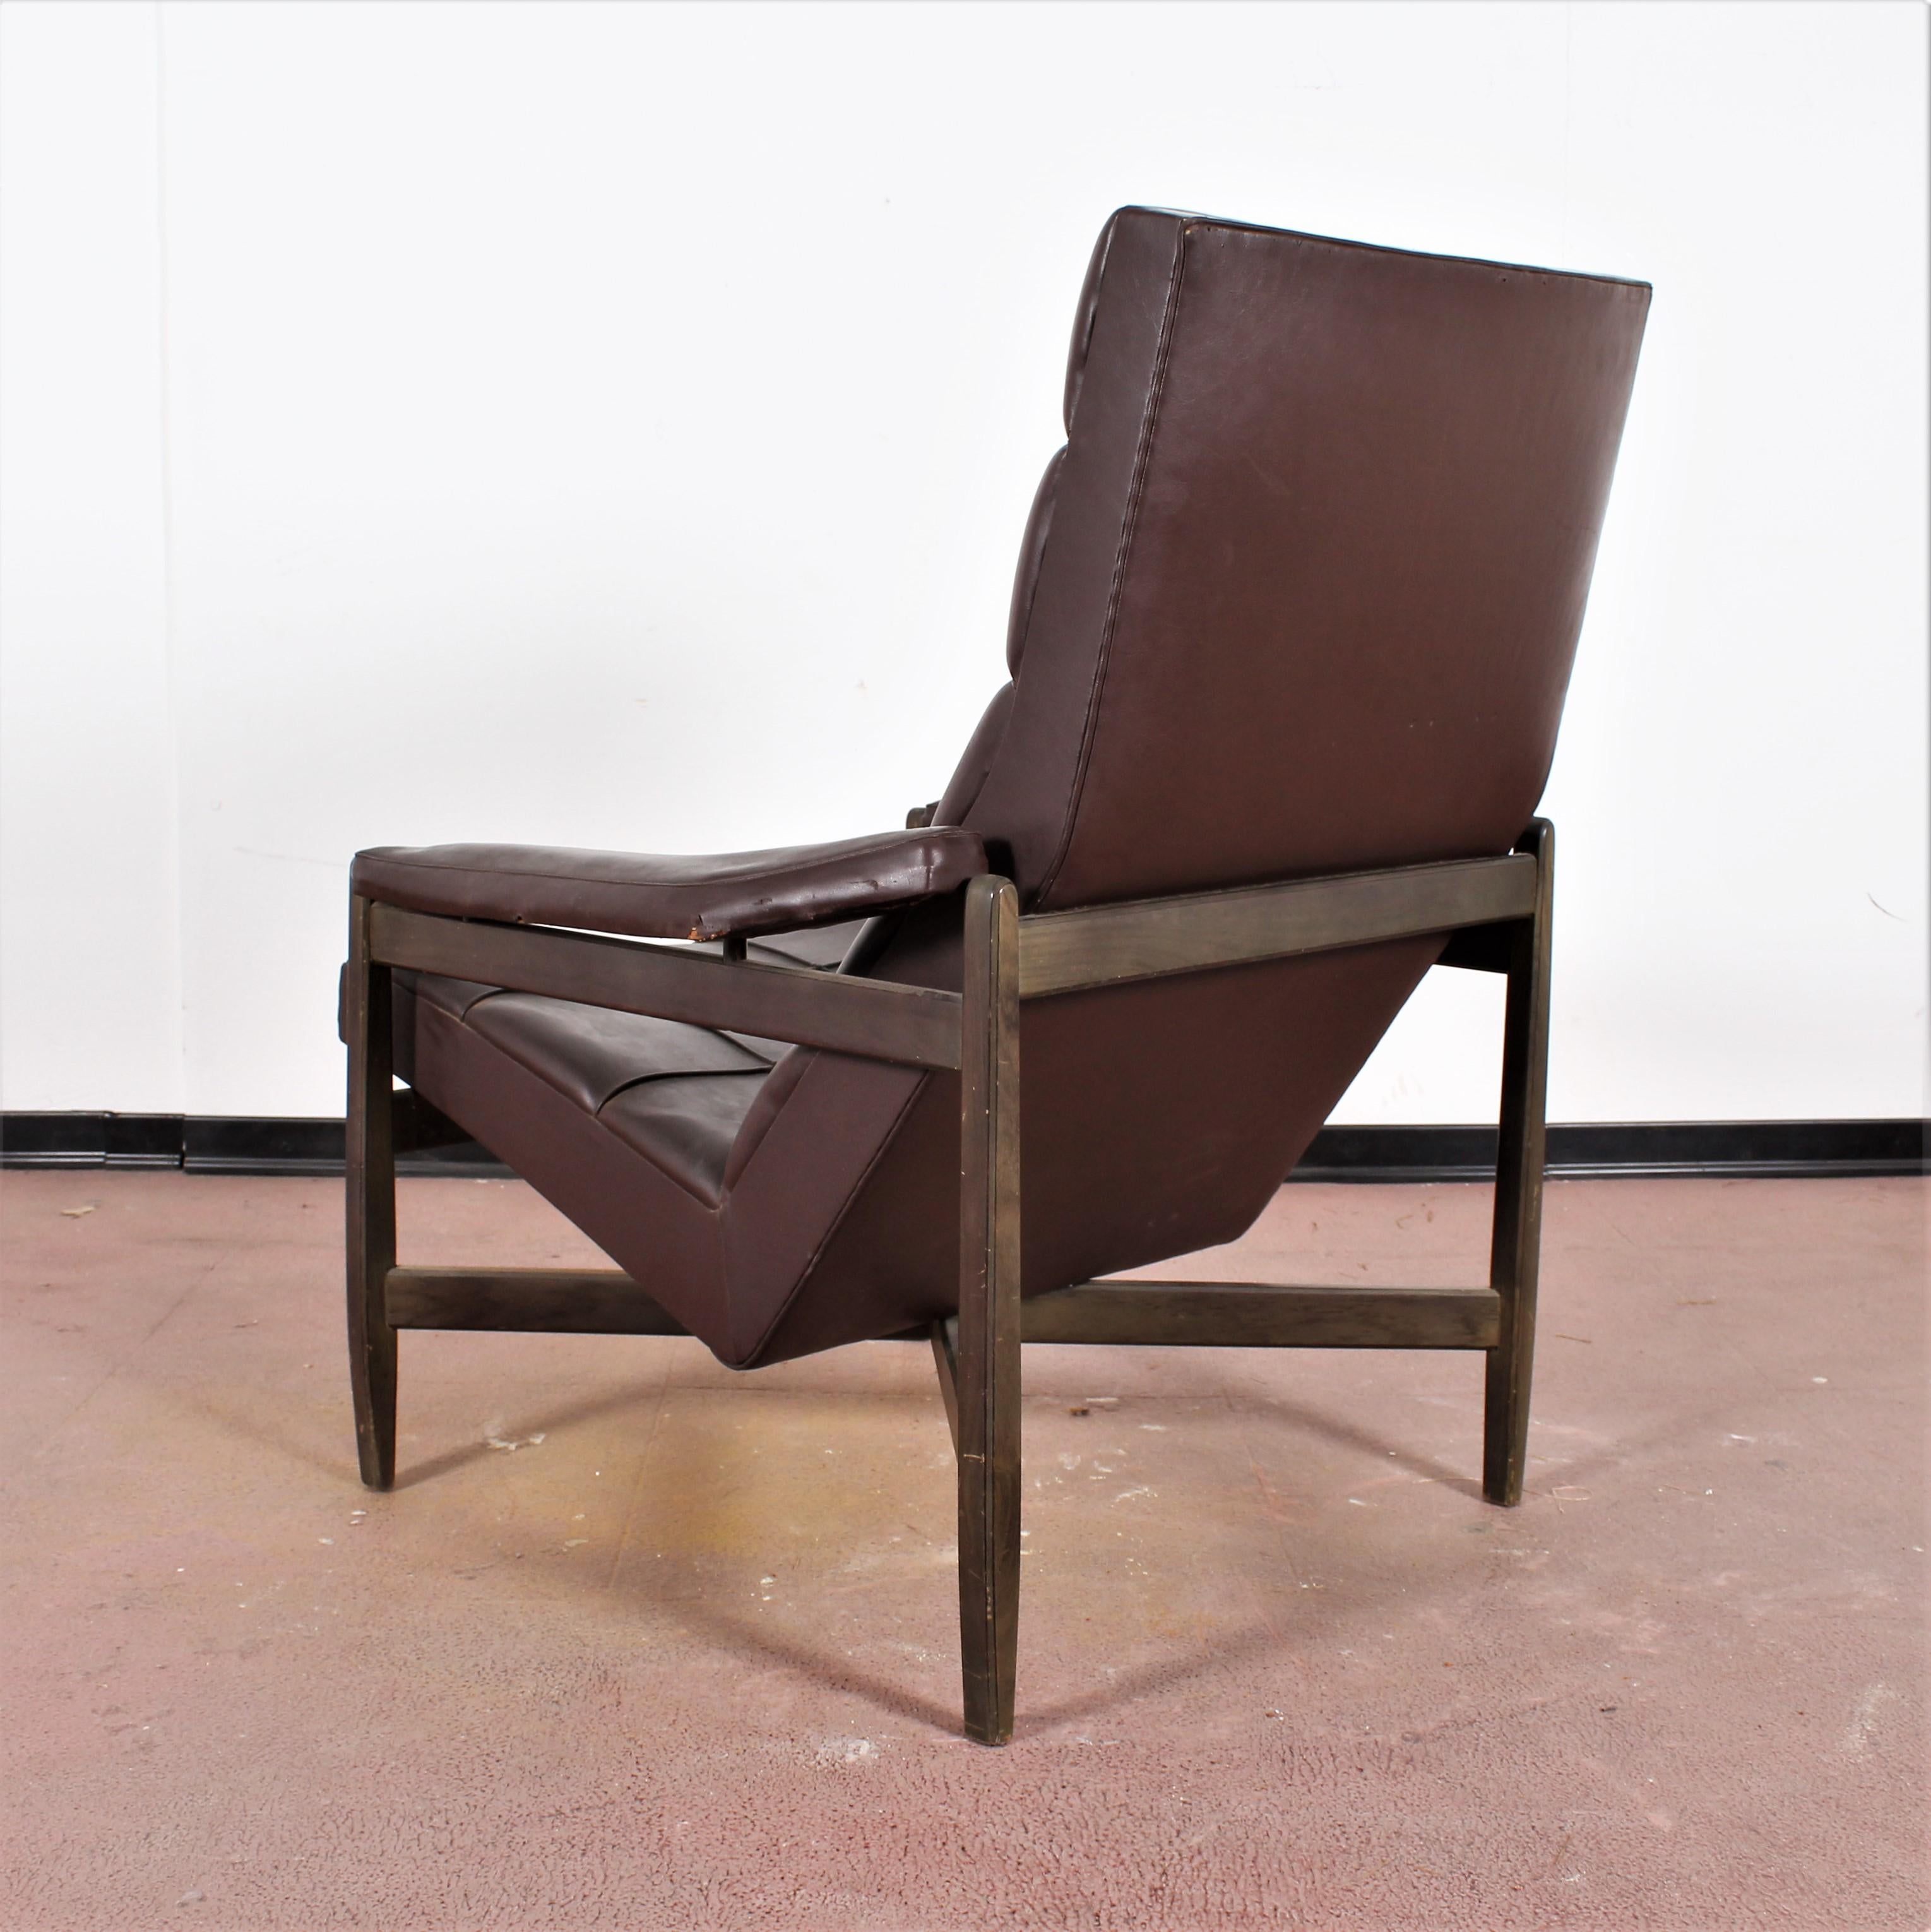 Swiss Wood and Brown Leather Minotti Lounge Chair and Ottoman, Italy, 1960s